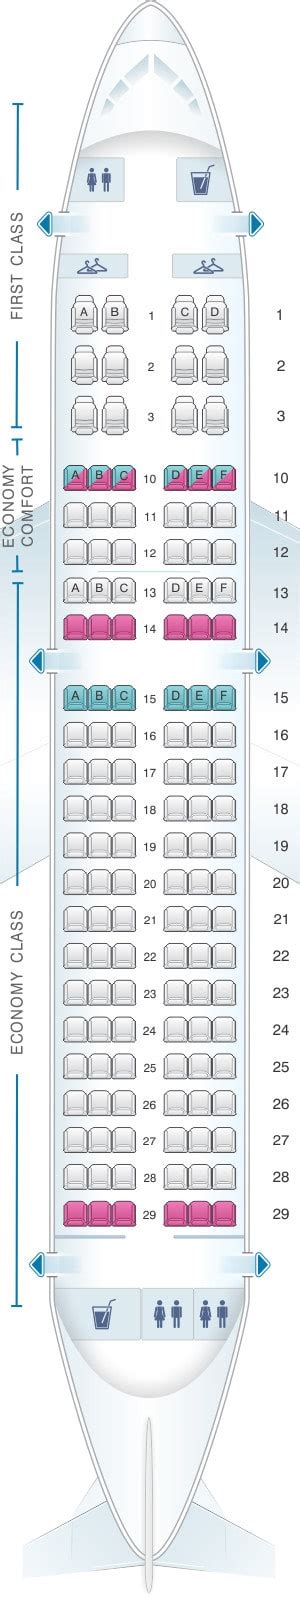 Delta Airbus A319 Seat Map Airportix